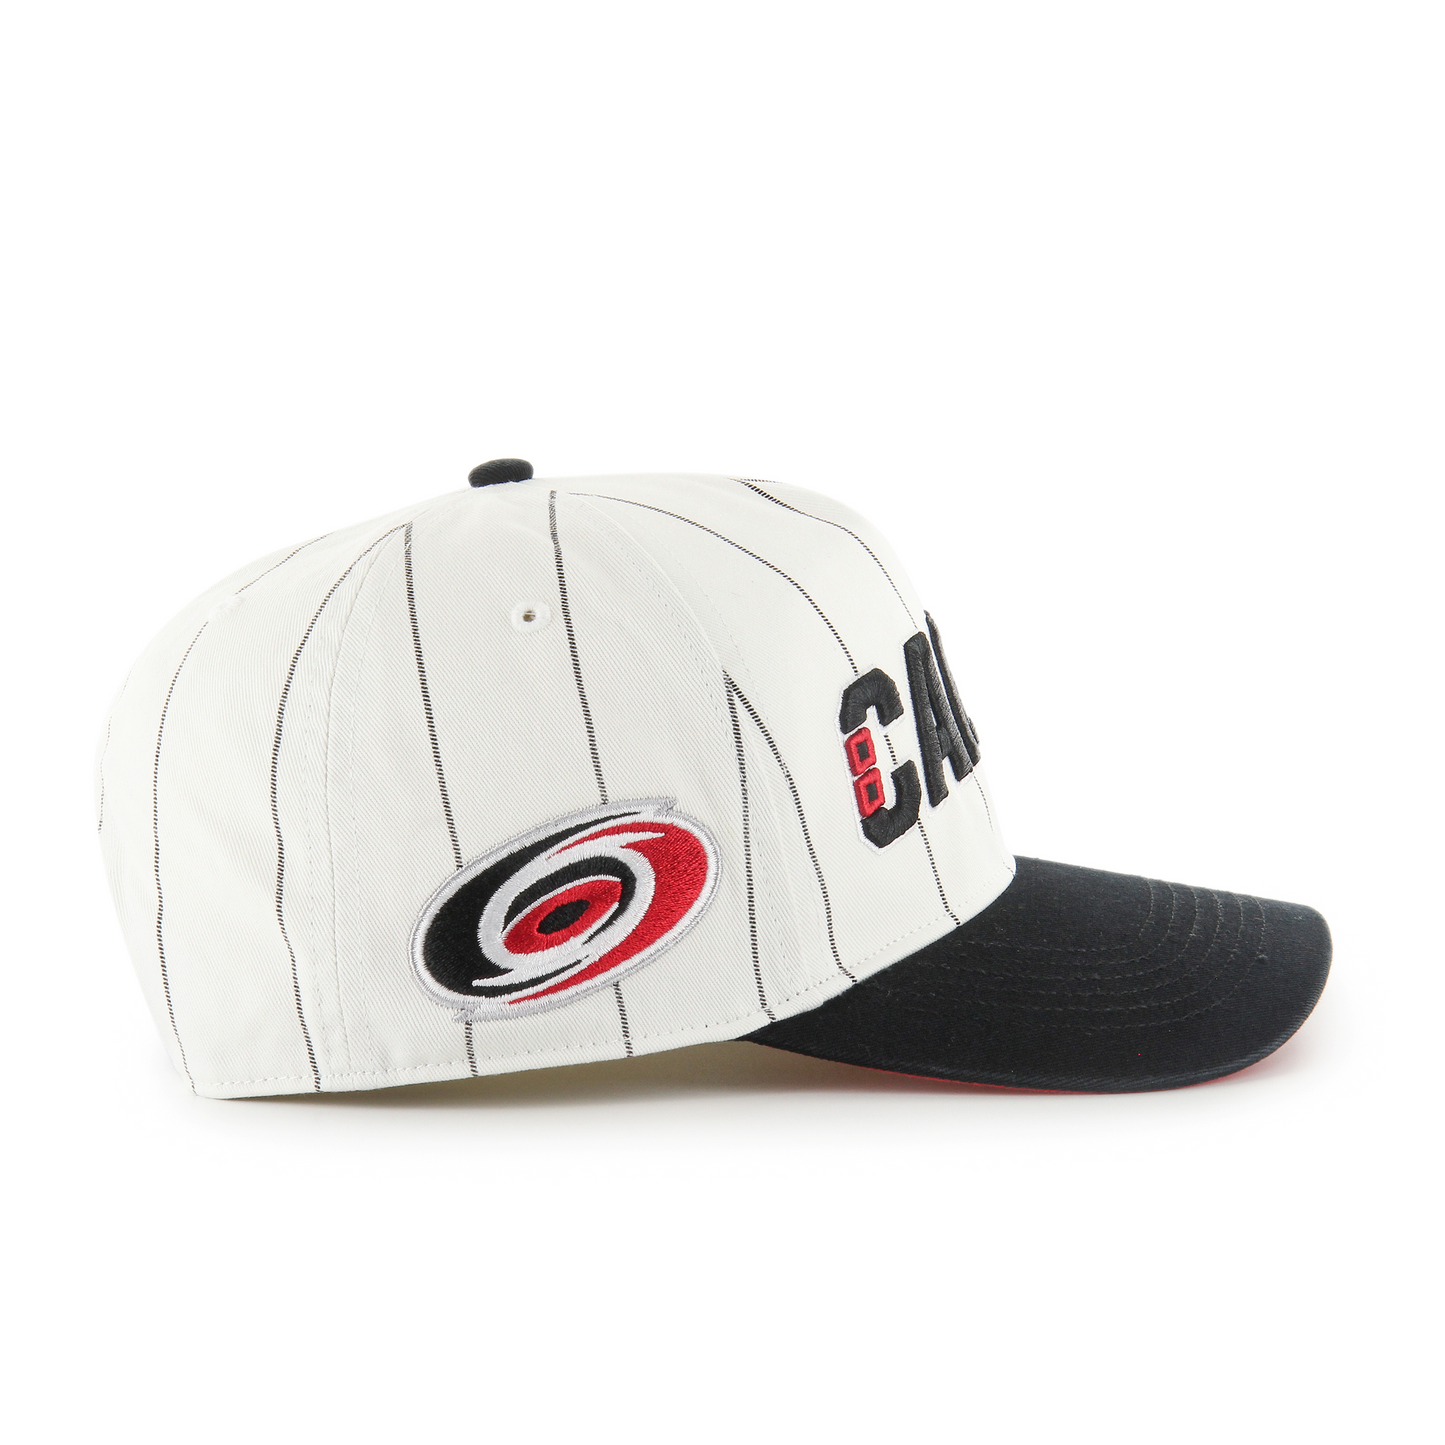 Side: Baseball cap white with black pin stripes canes primary logo